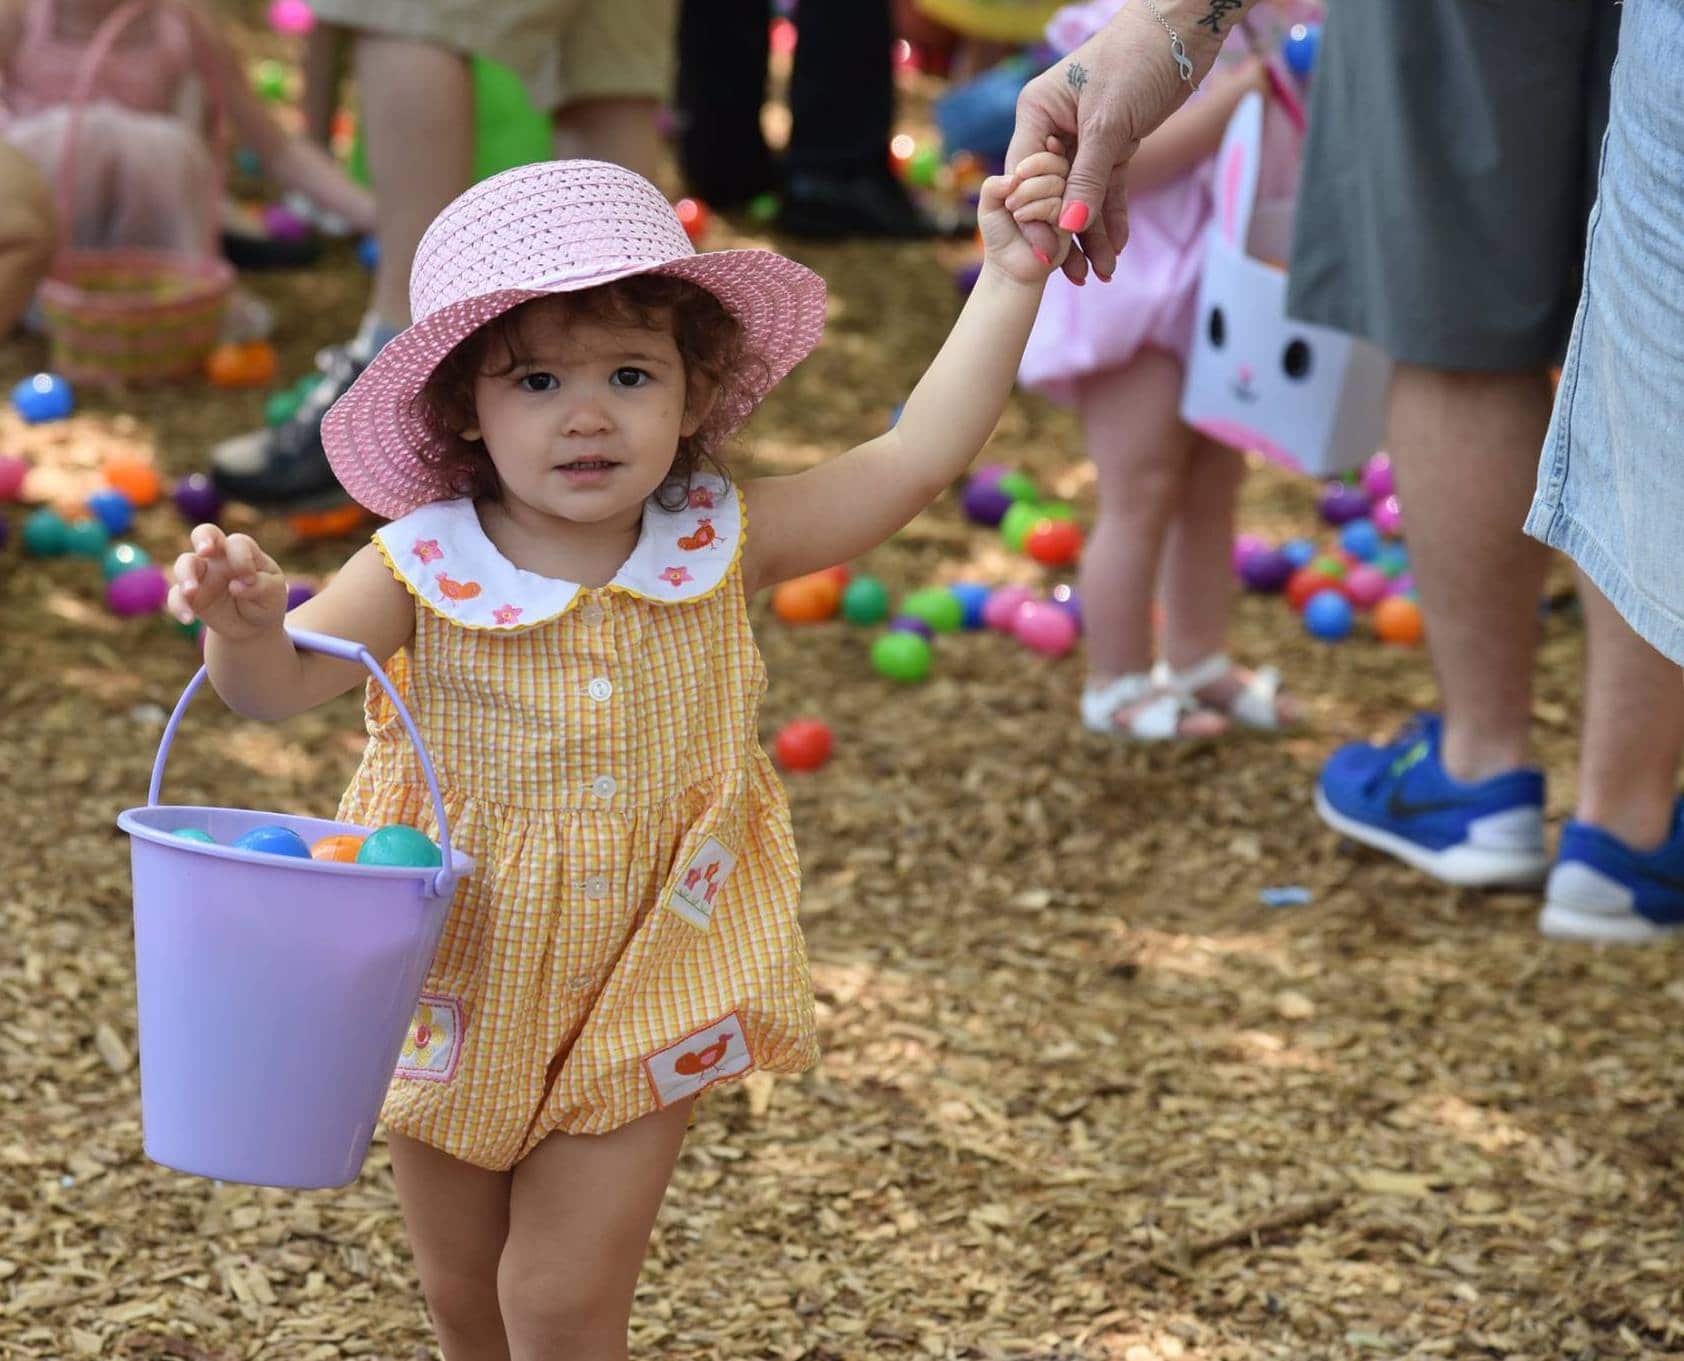 28953941 10156297533679680 4159644939962532289 o 10 Easter egg hunts in Birmingham, including a 25,000-count egg hunt at Oak Mountain State Park. Plus where to find the Easter Bunny.